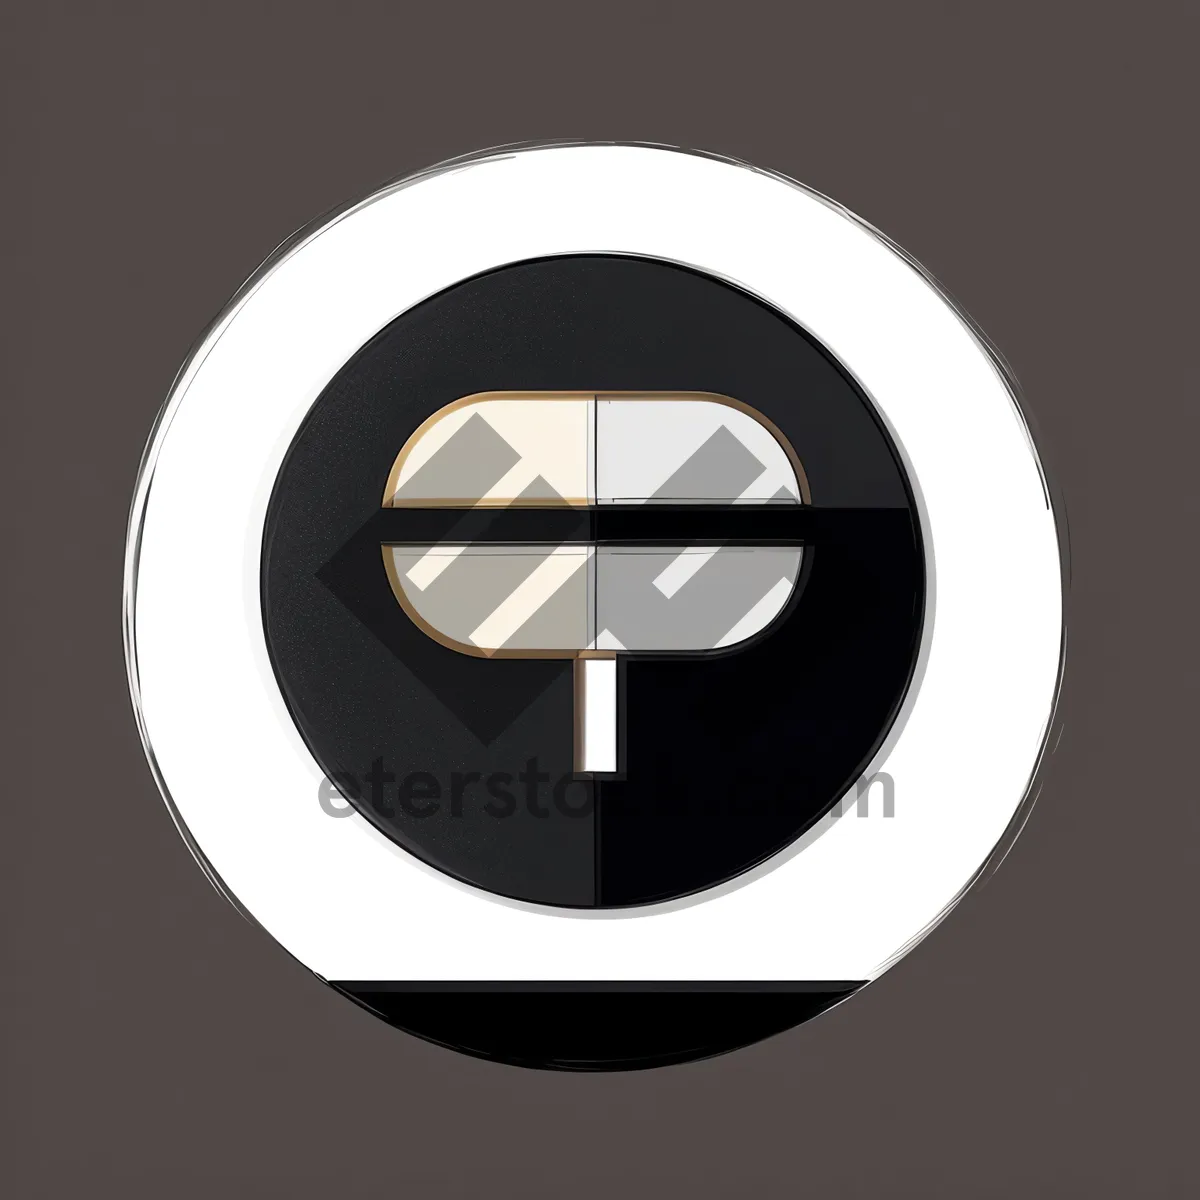 Picture of Shiny 3D Metallic Black Circle Button